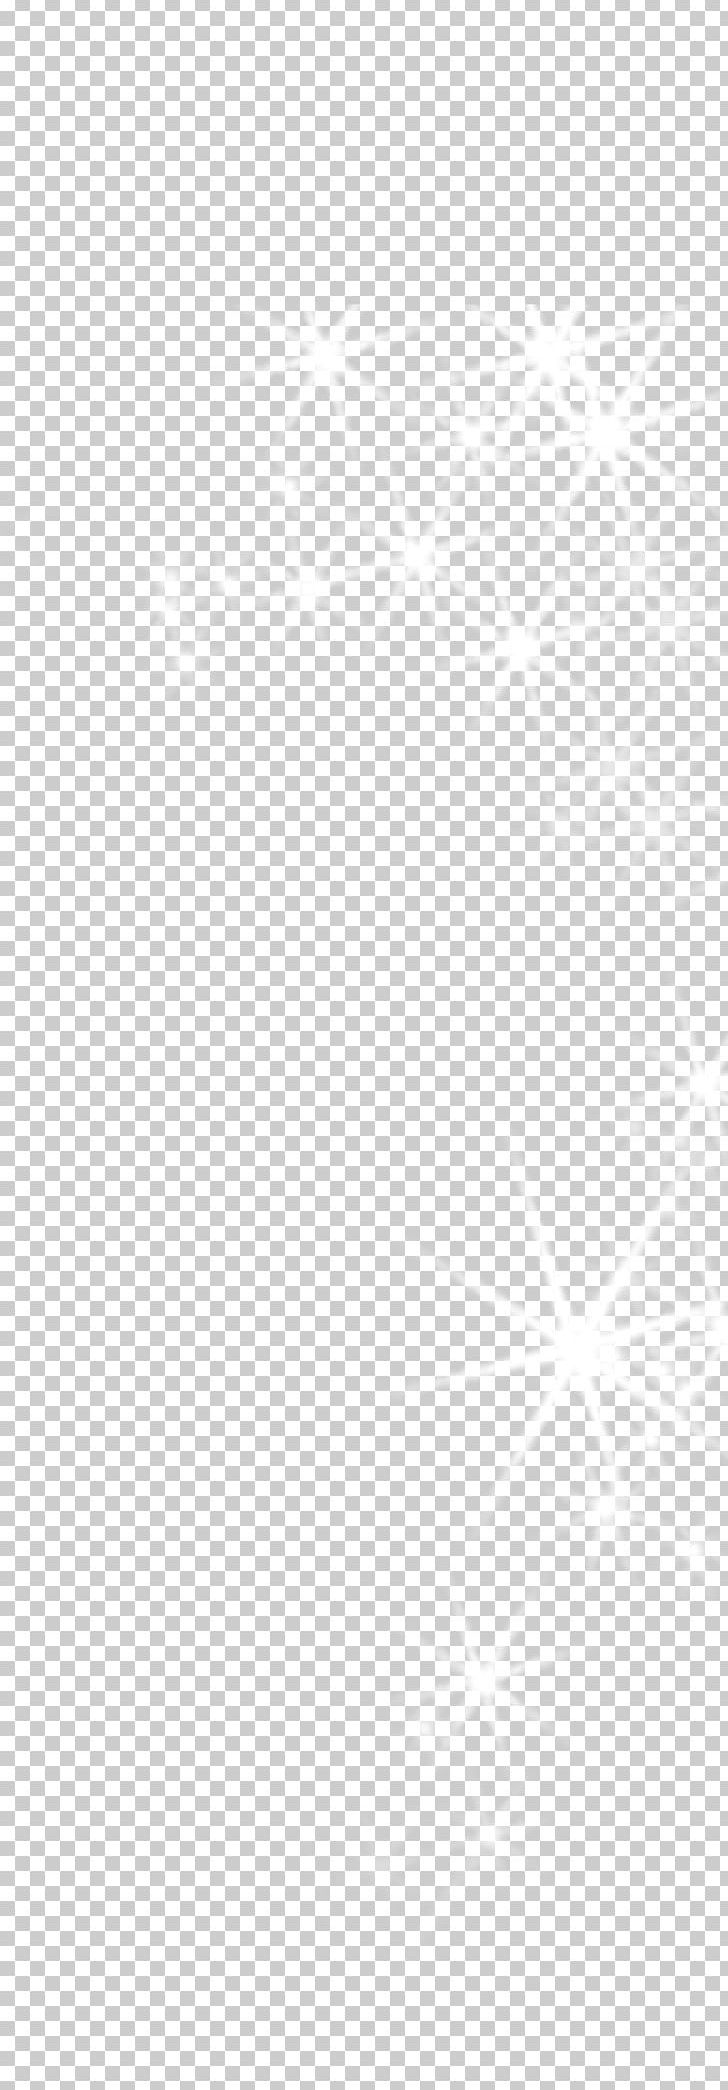 White Black Angle Area Pattern PNG, Clipart, Angle, Area, Black, Black And White, Black Angle Free PNG Download